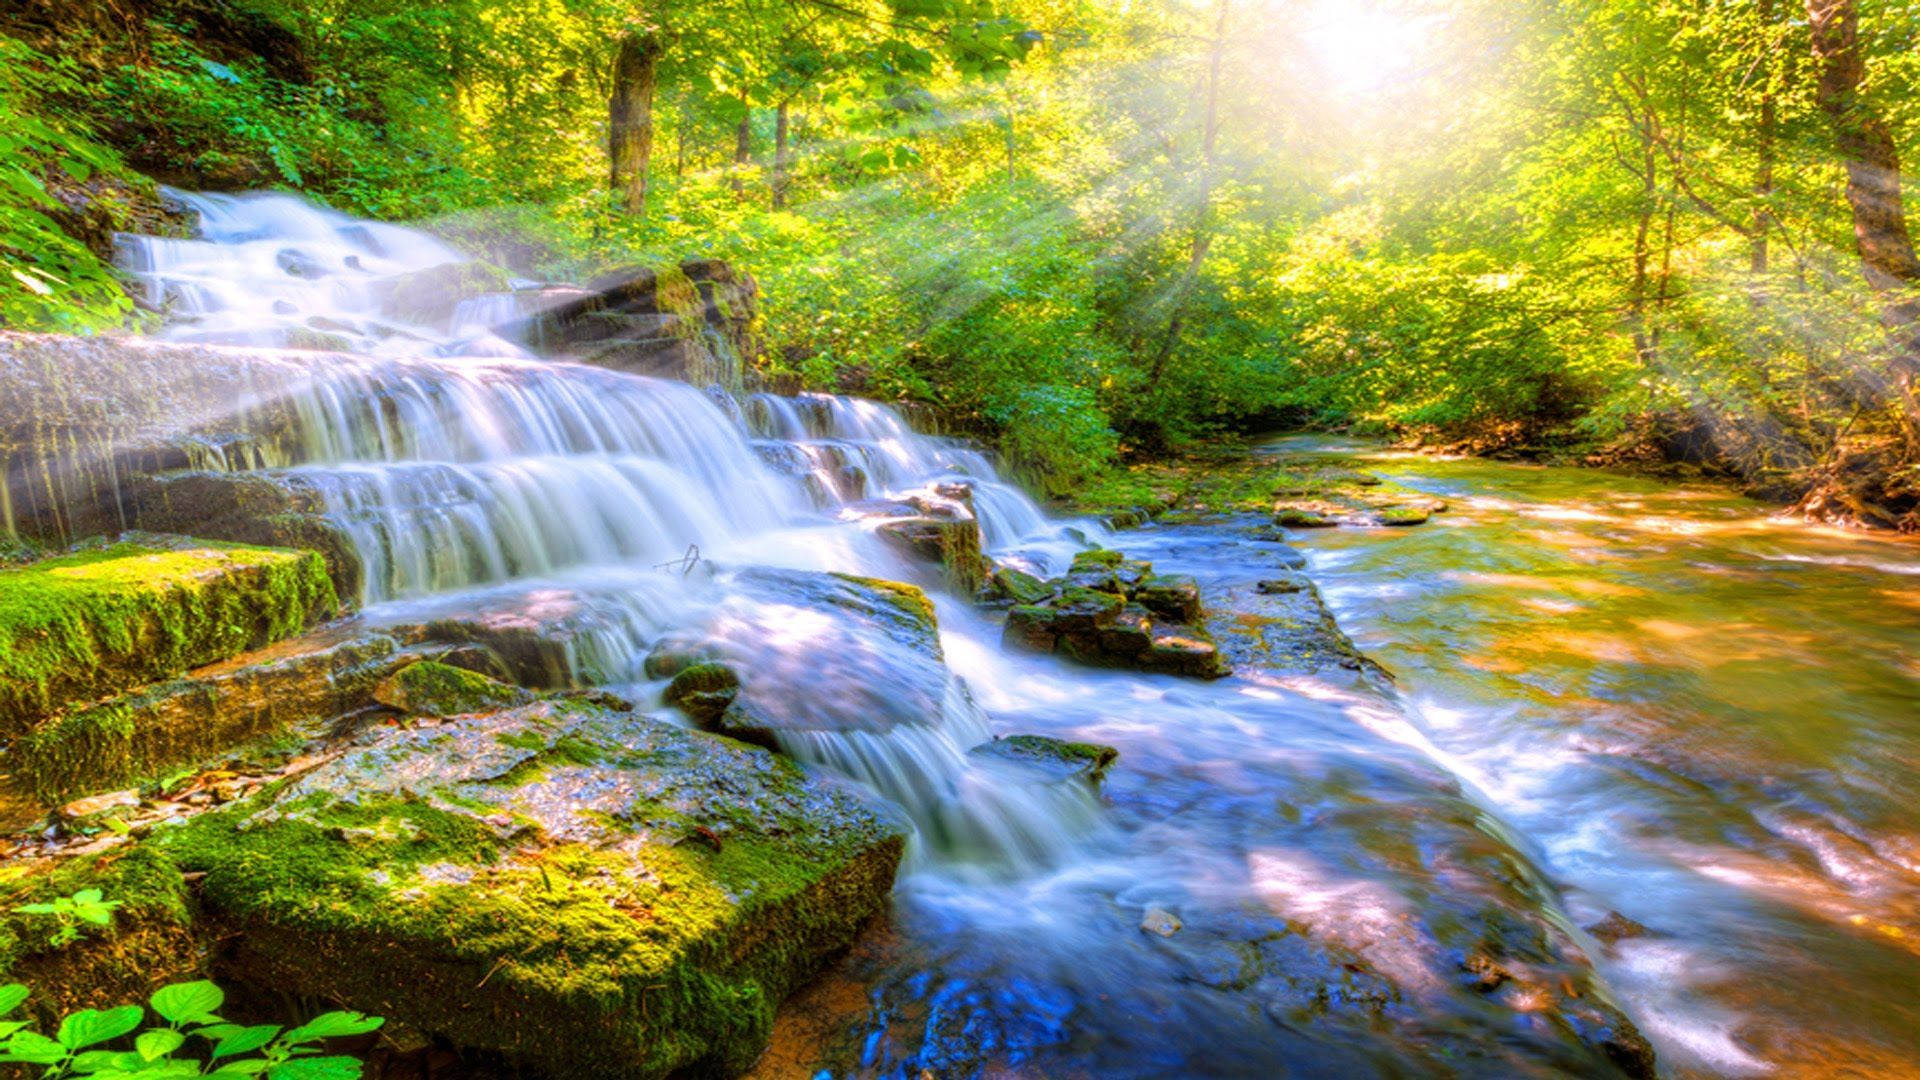 Enjoy the tranquil beauty of nature in this relaxing desktop background Wallpaper